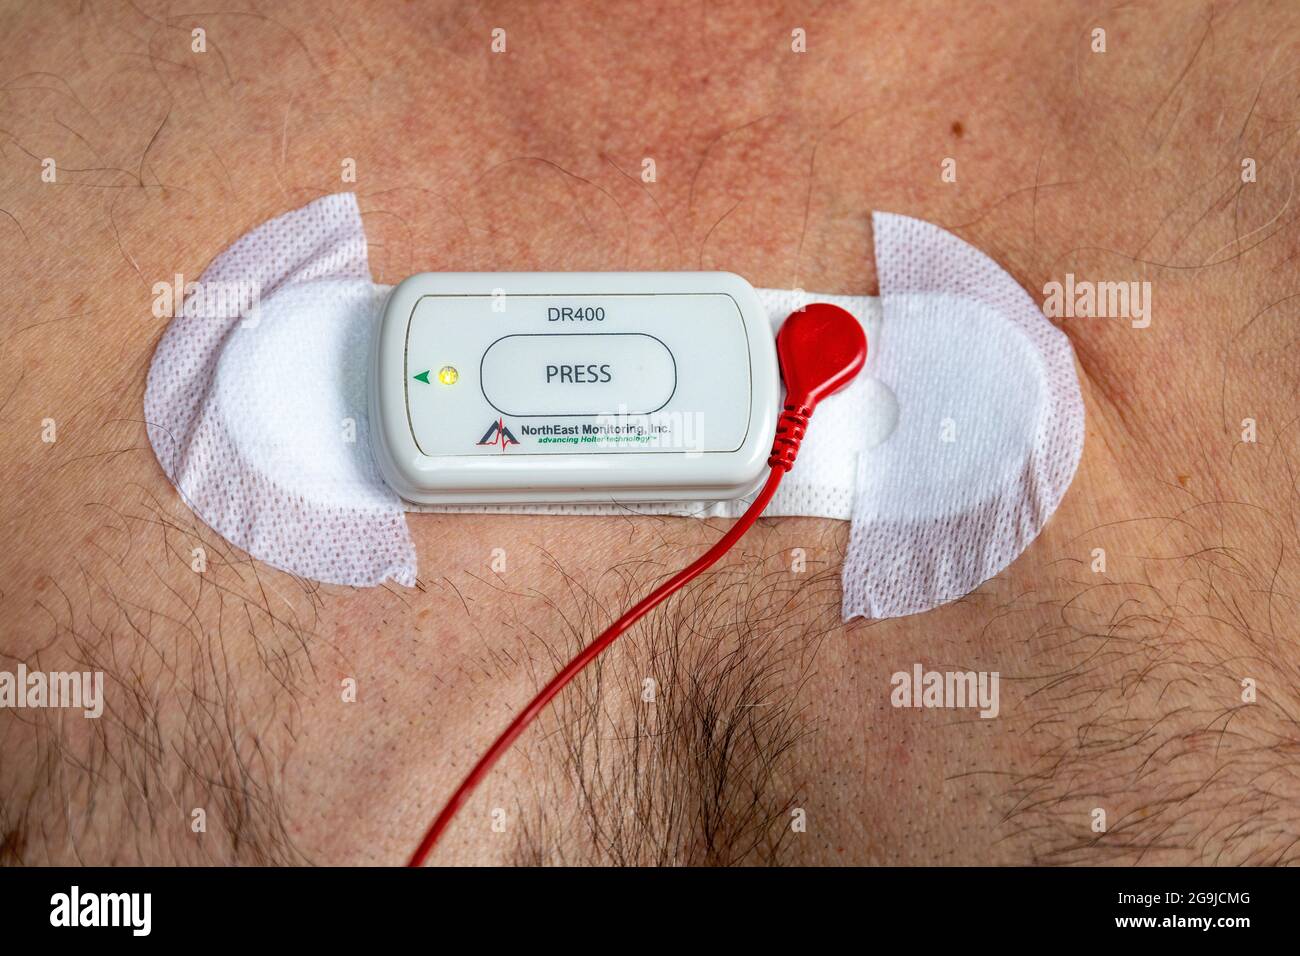 Holter Heart Monitor On A Male Caucasian Patients Chest To Record Electrical Activity of The Heart For Up To 72 Hours, Measures Your Heart Rate. Stock Photo